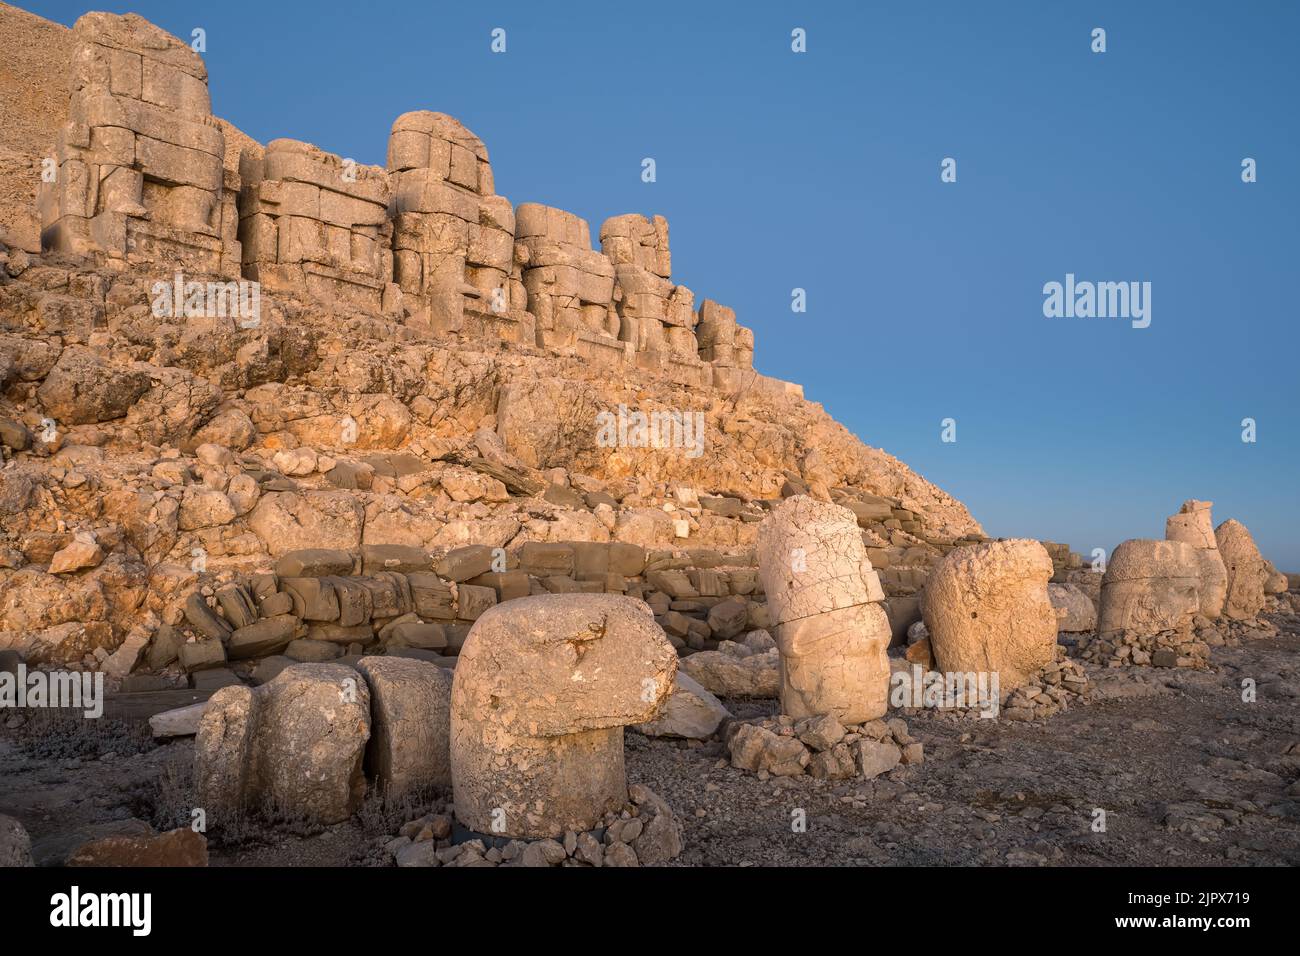 Antique statues on Nemrut mountain at dawn in Turkey. Stock Photo